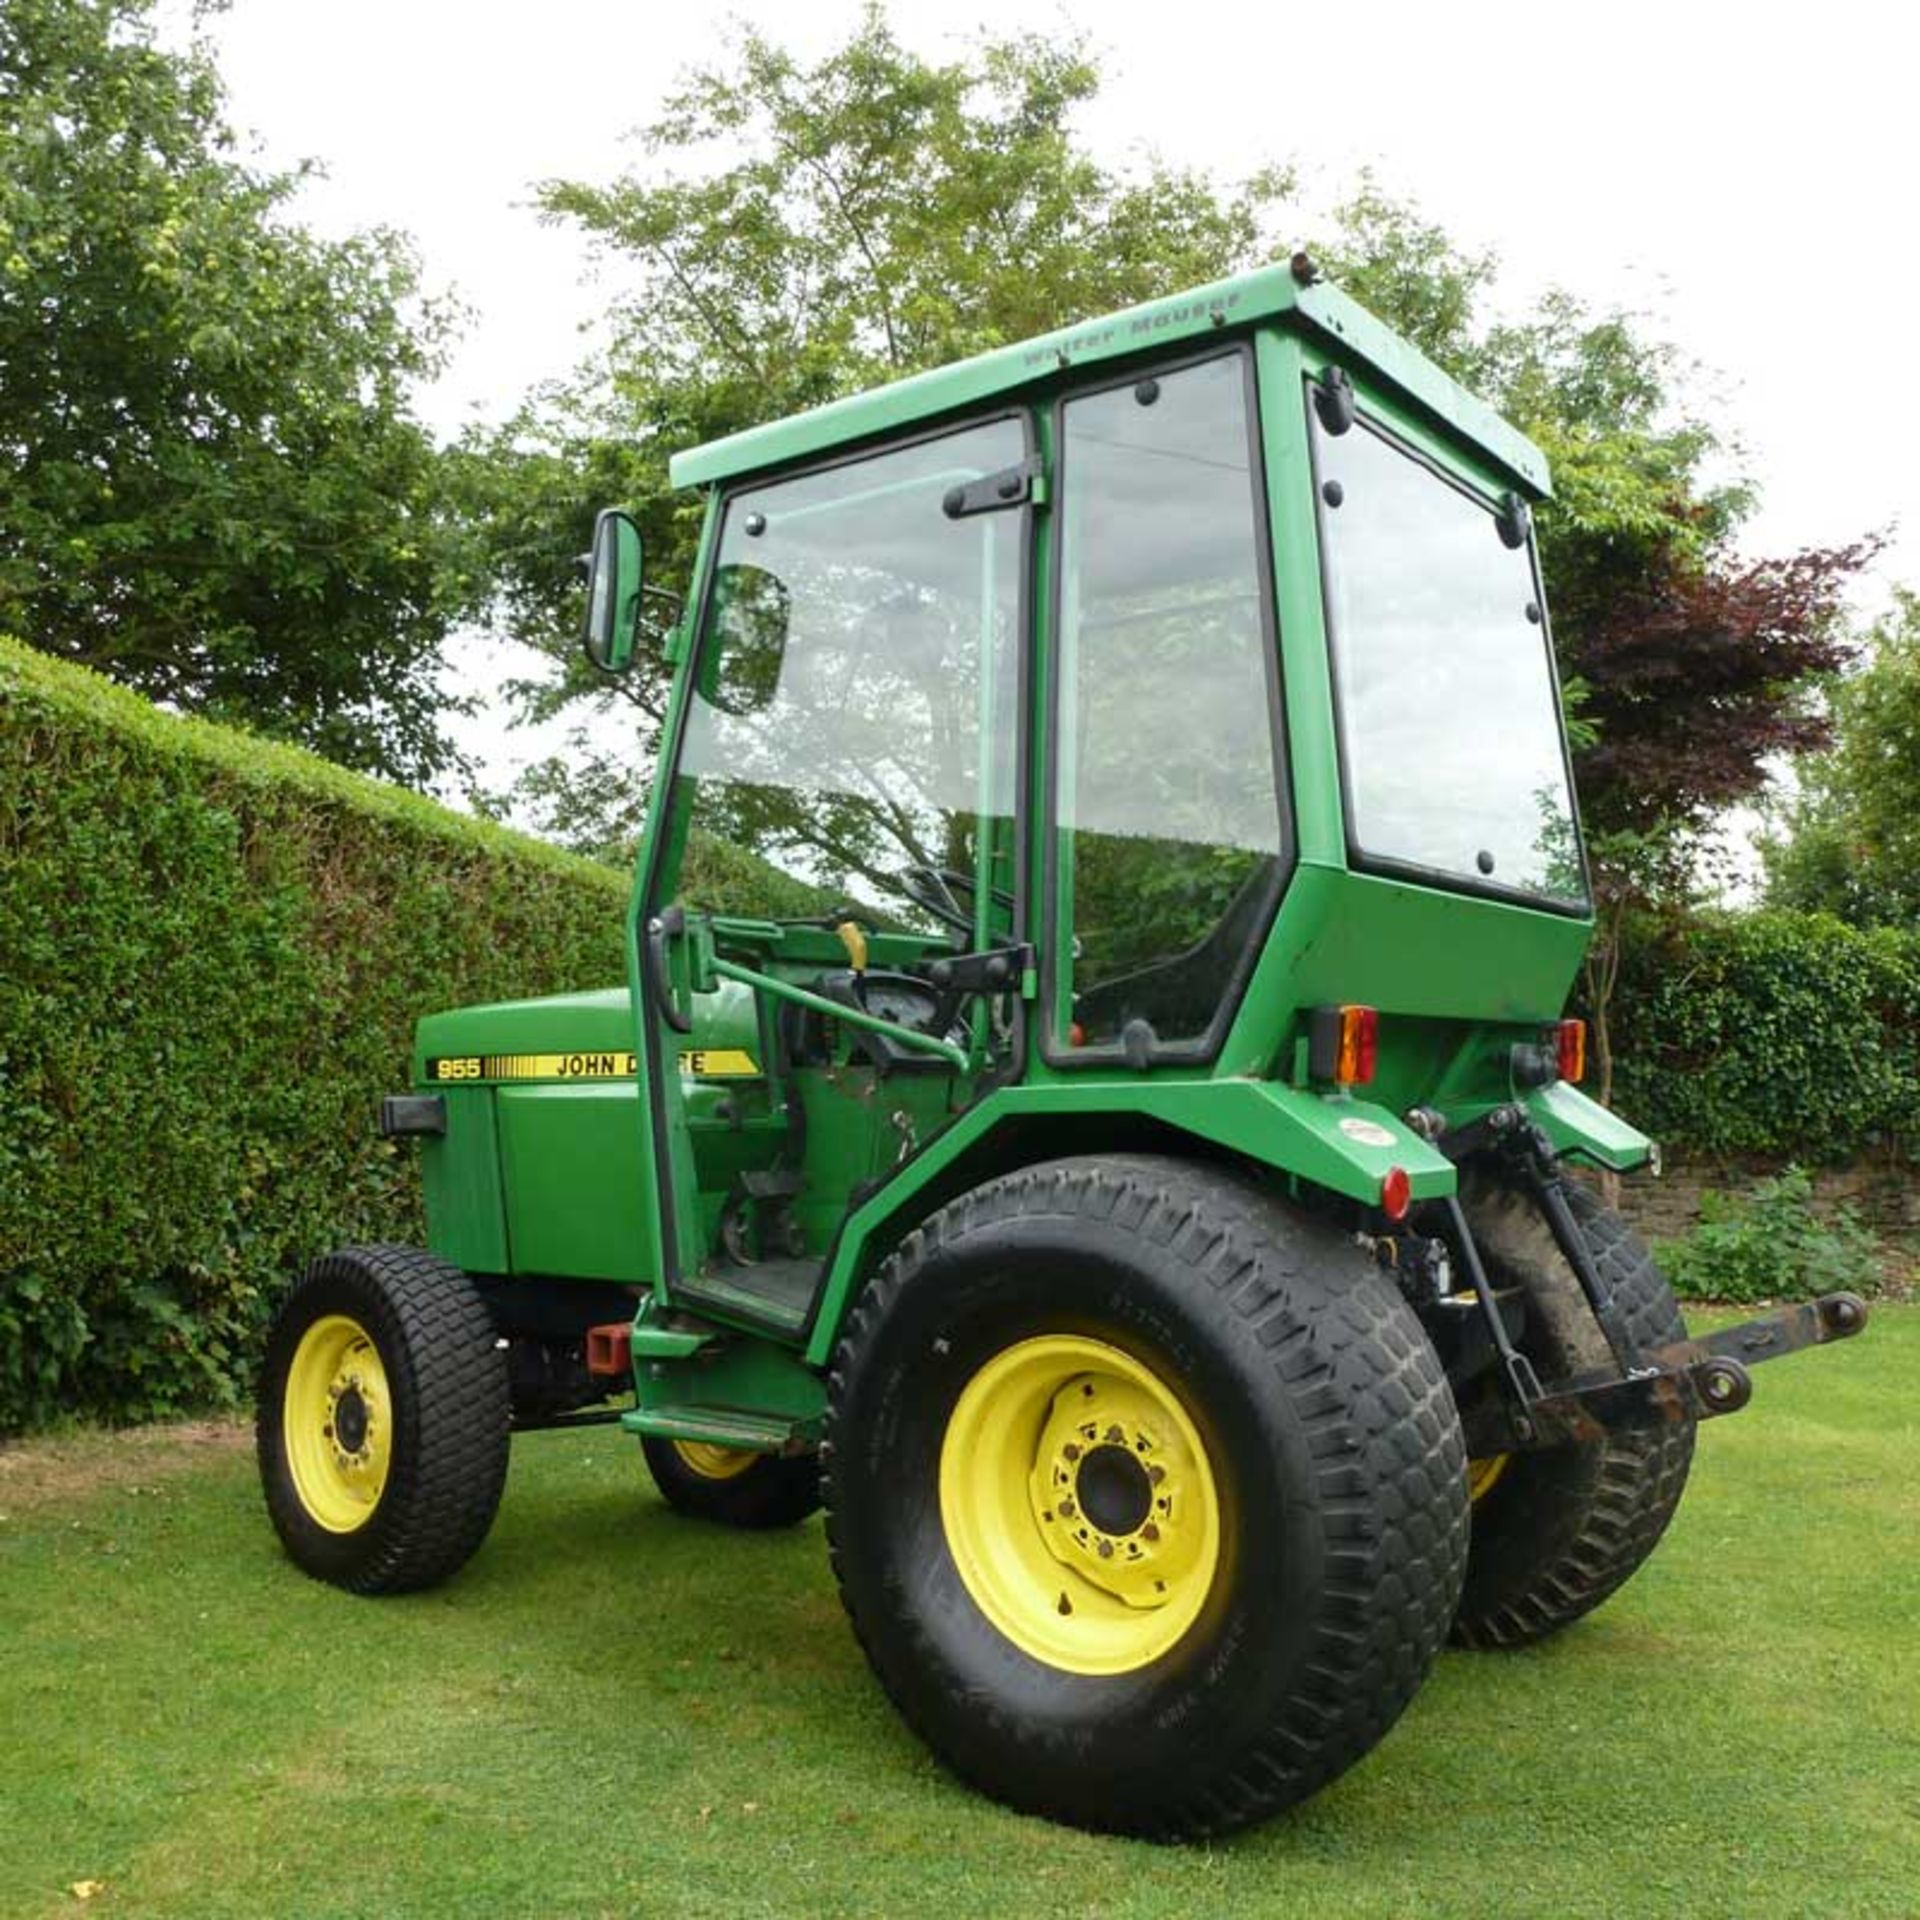 1992 John Deere 955 Compact Tractor With Full Mauser Cab